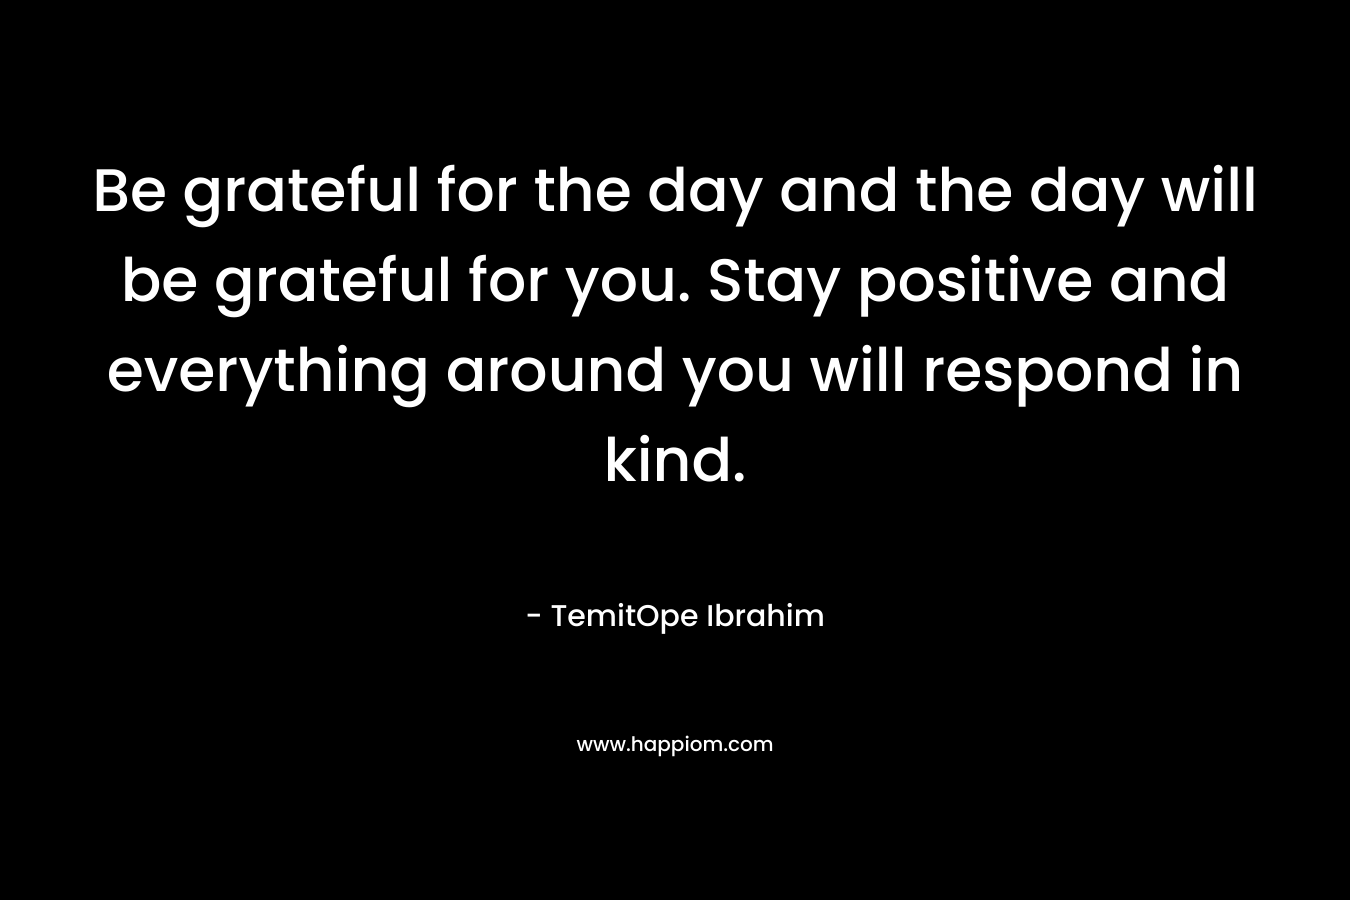 Be grateful for the day and the day will be grateful for you. Stay positive and everything around you will respond in kind.